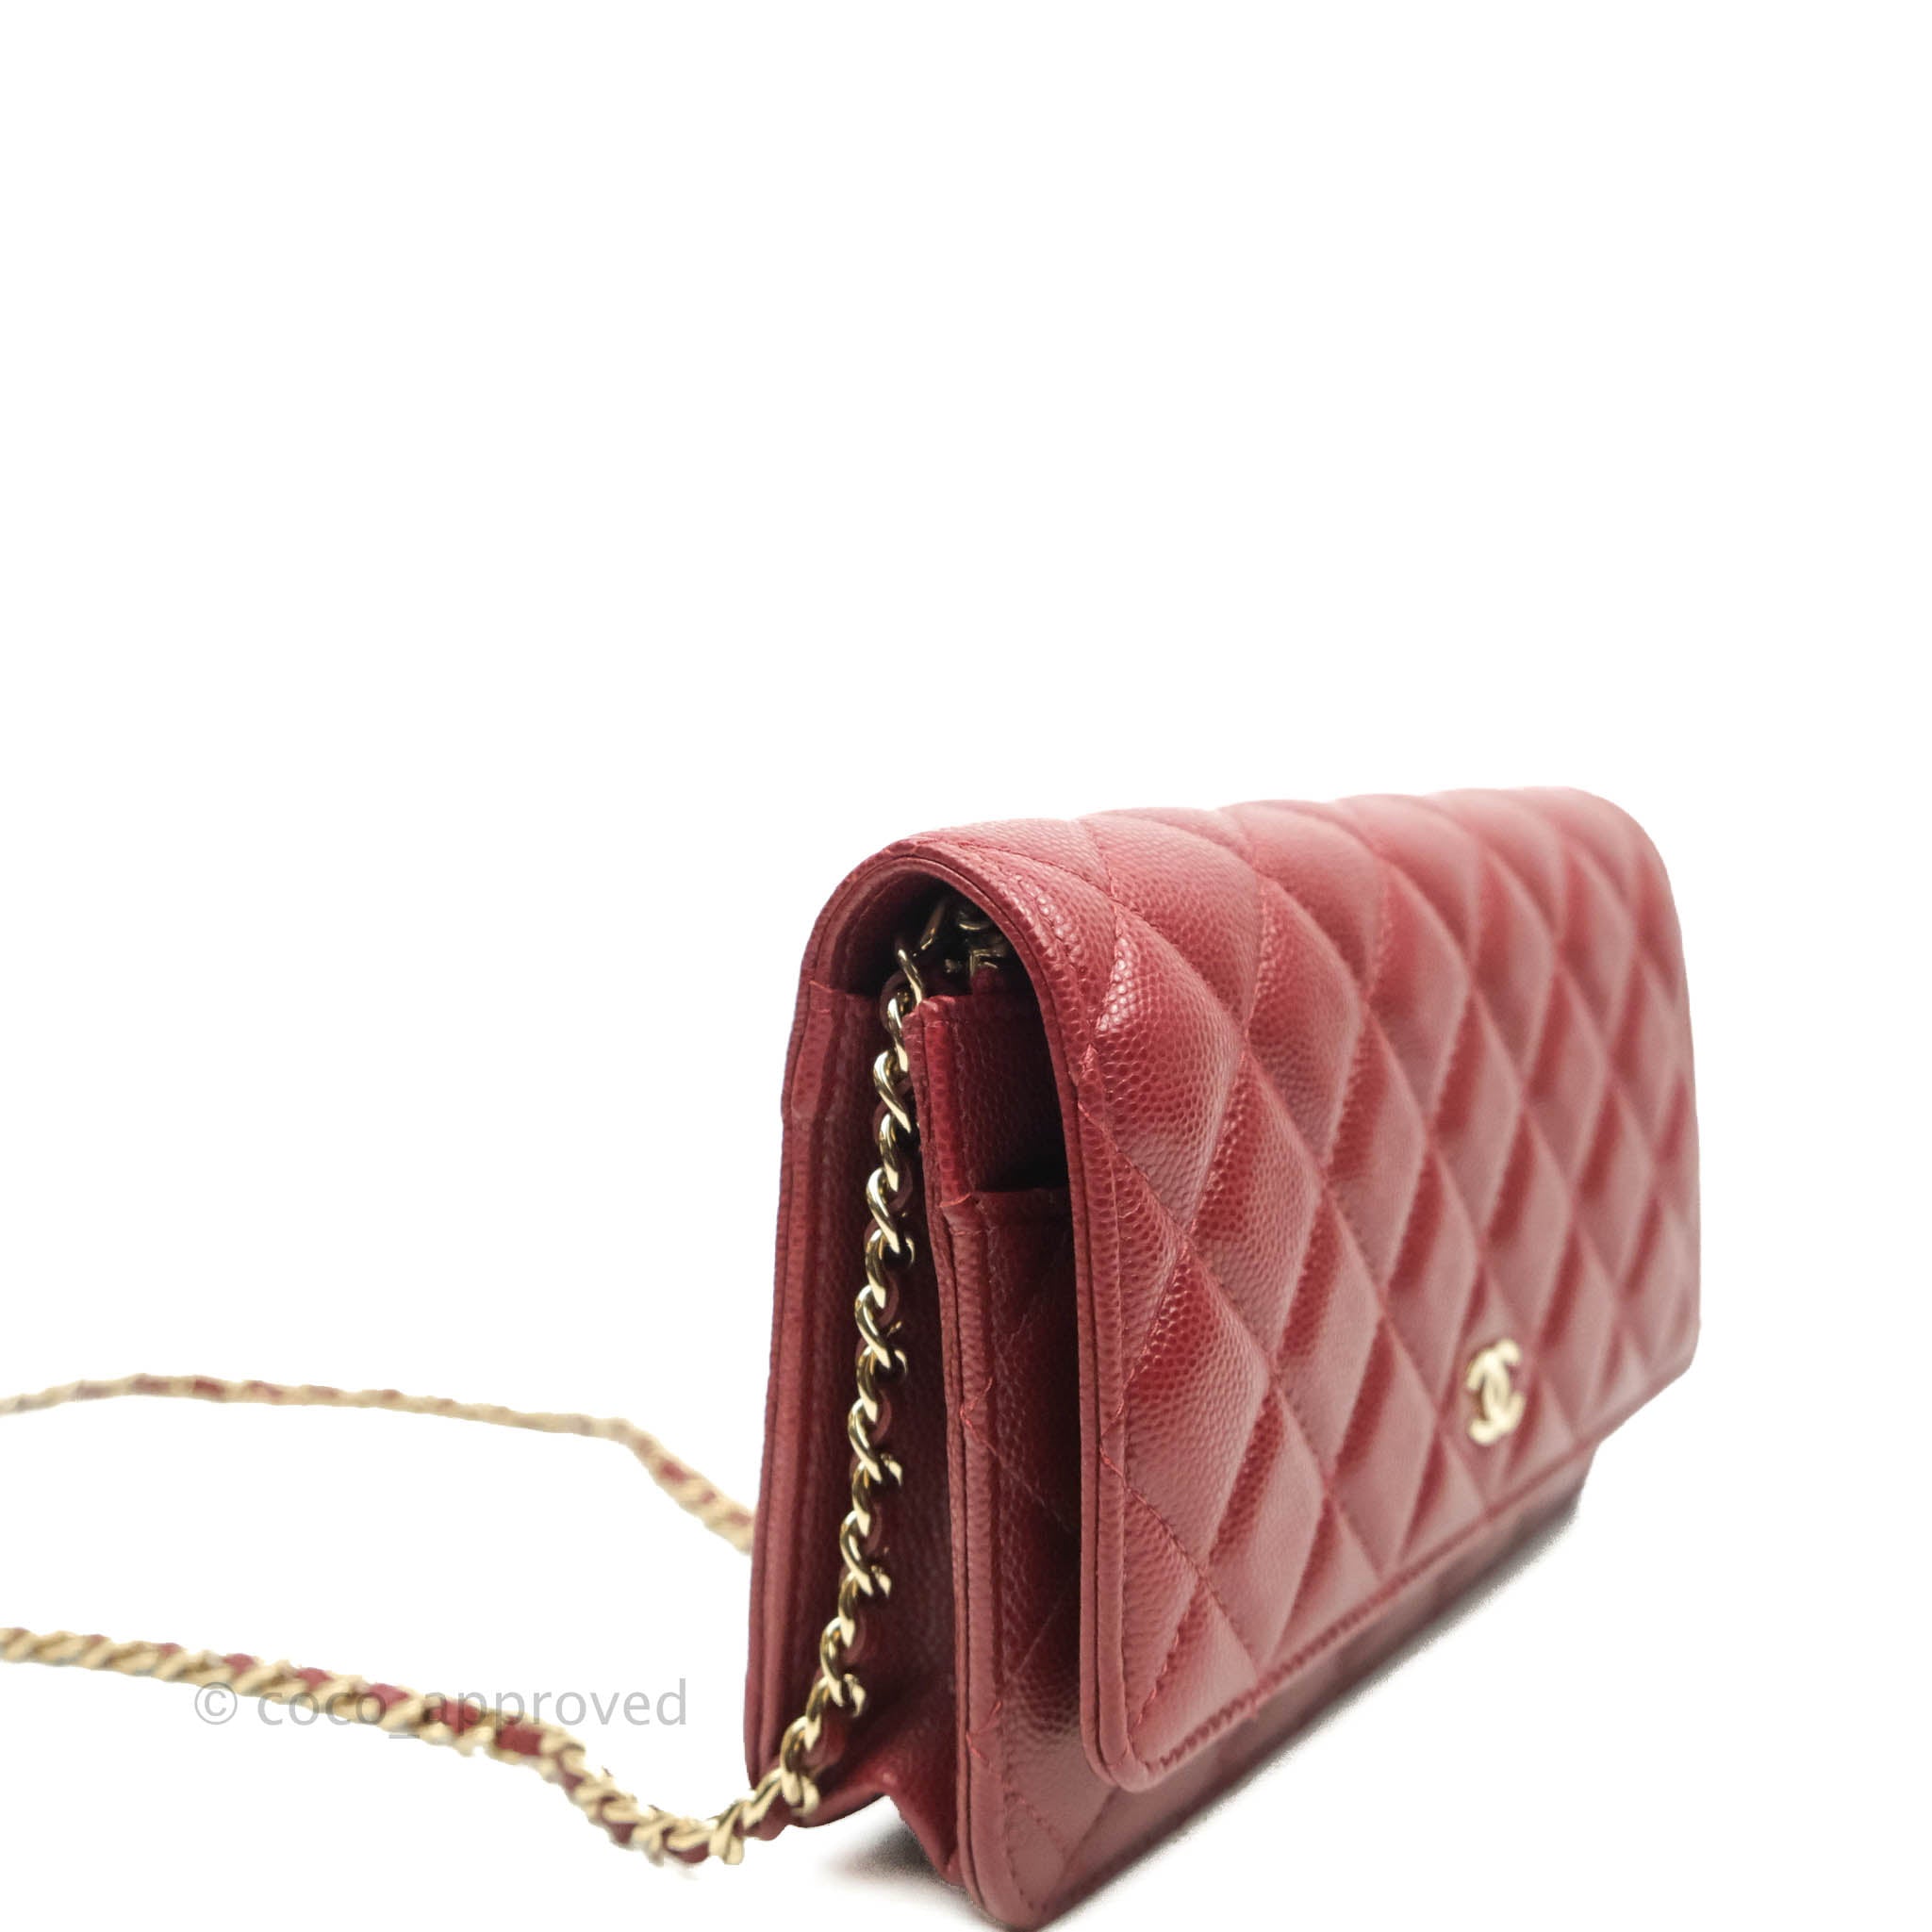 Naughtipidgins Nest - New* Chanel Classic Wallet on Chain WoC in Burgundy  Caviar with Gold Hardware. RRP £2,060 The ultimate, evening wear with shiny  gold tone hardware, crafted from a firm, glossy